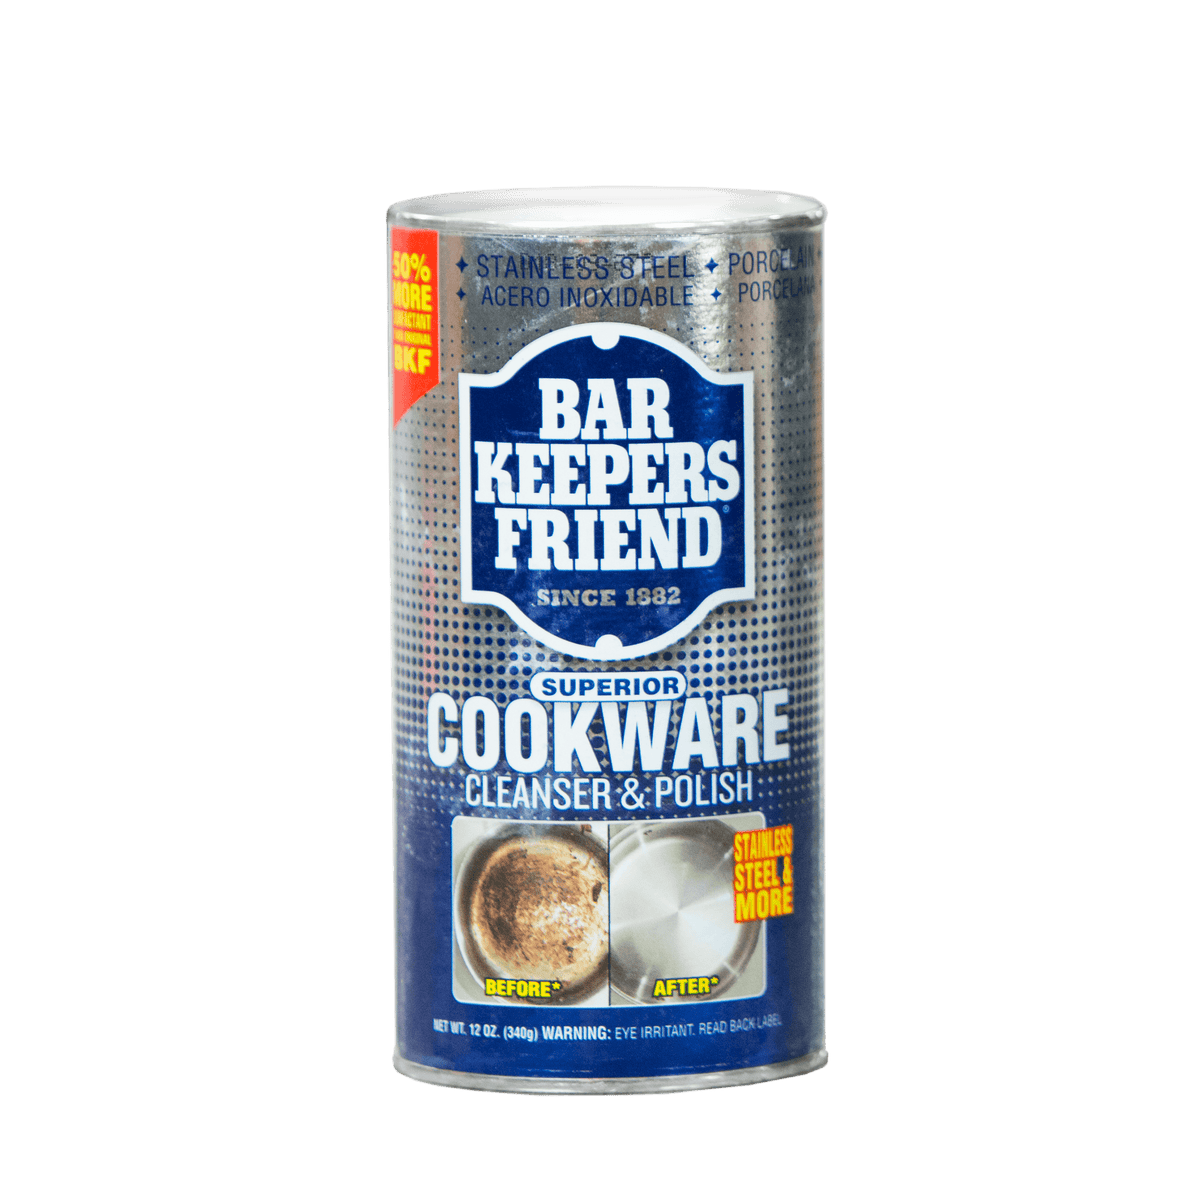 Bar Keepers Friend - Cookware Cleaner